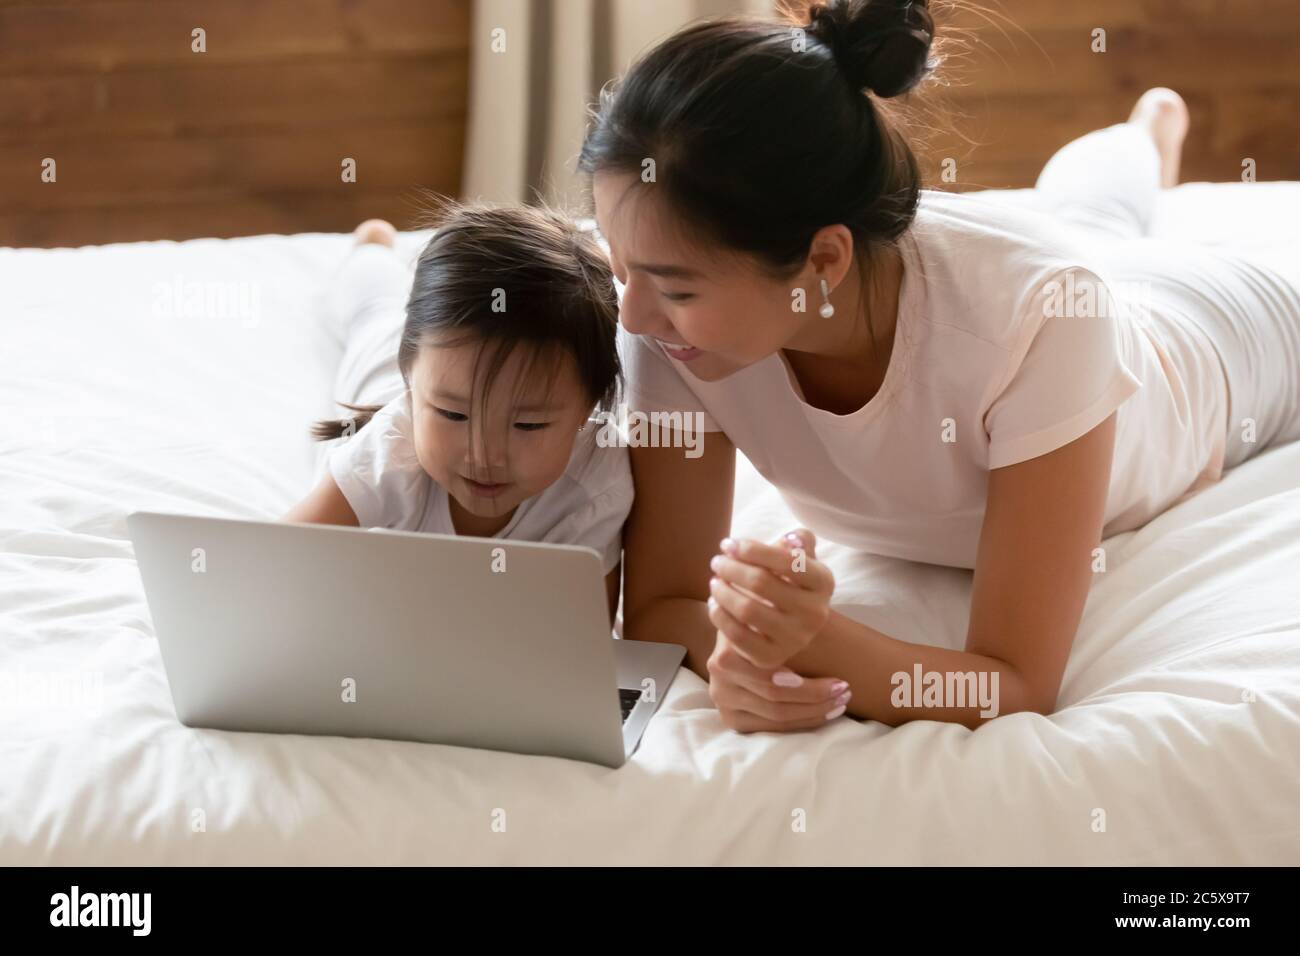 Cute asian baby girl using computer with mommy. Stock Photo